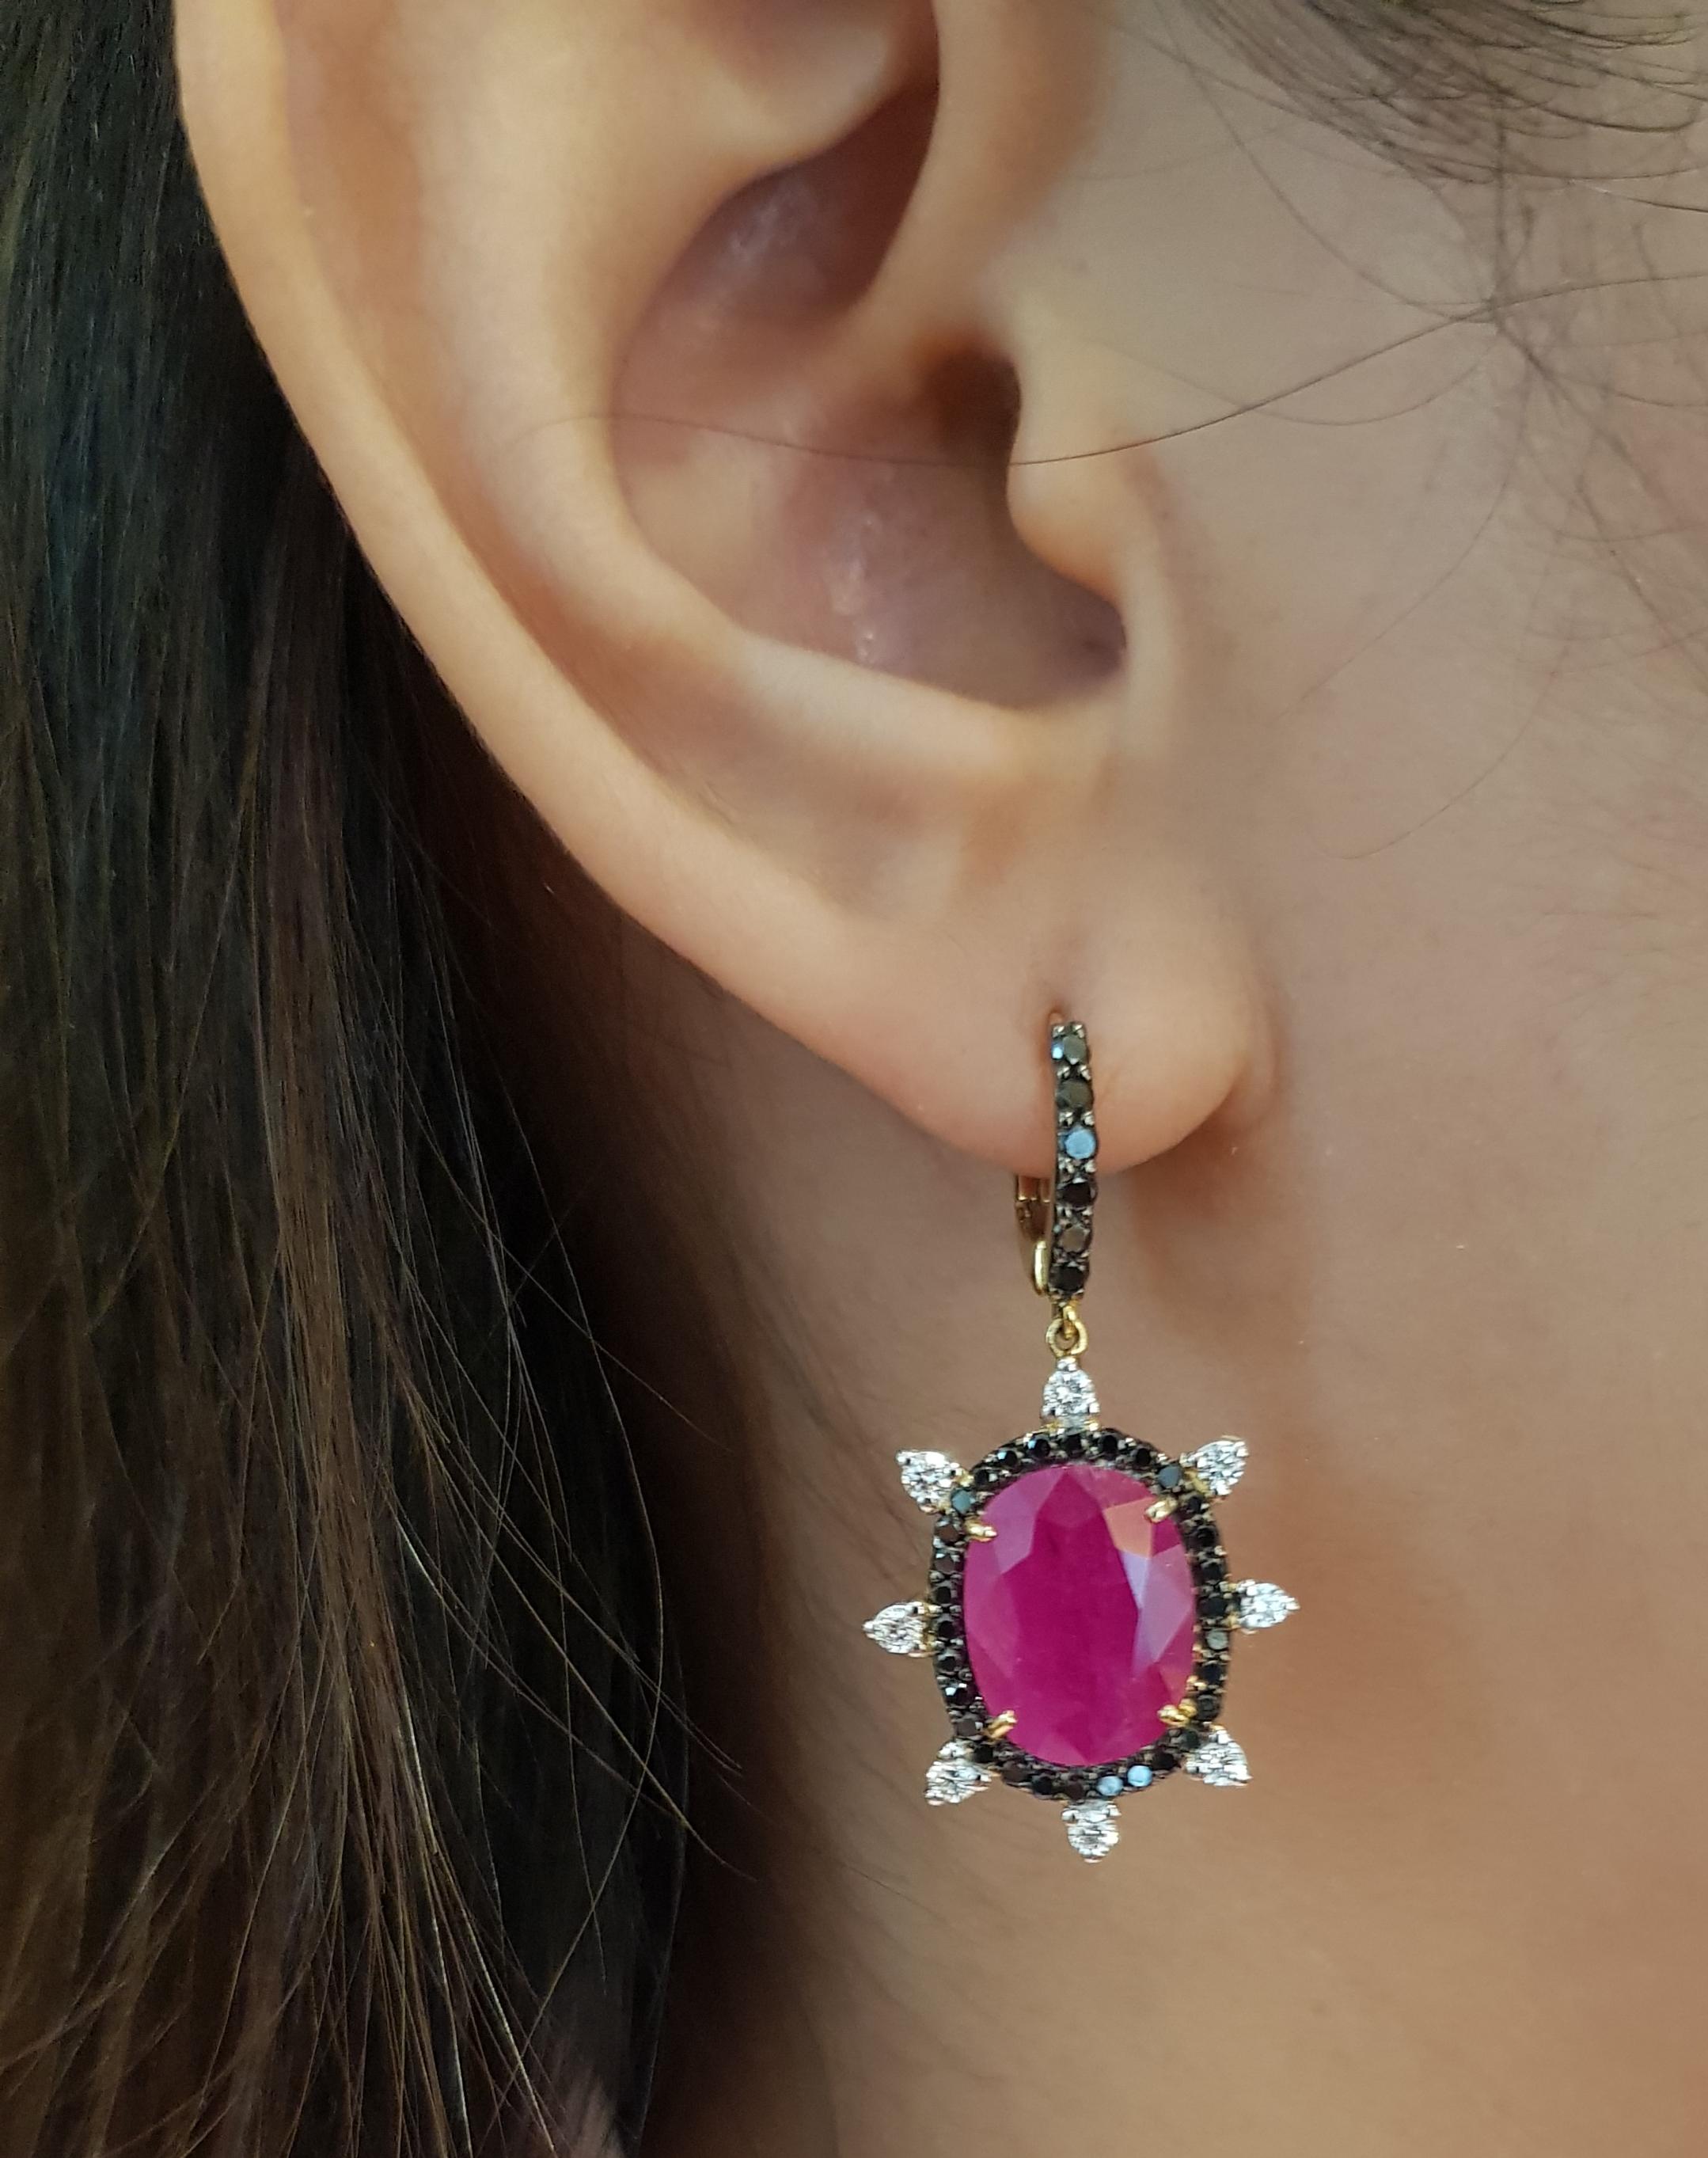 Ruby 9.34 carats with Black Diamond 0.85 carat and Diamond 0.44 Earrings set in 18 Karat Gold Settings

Width:  1.8 cm 
Length:  3.4 cm
Total Weight: 8.95 grams

